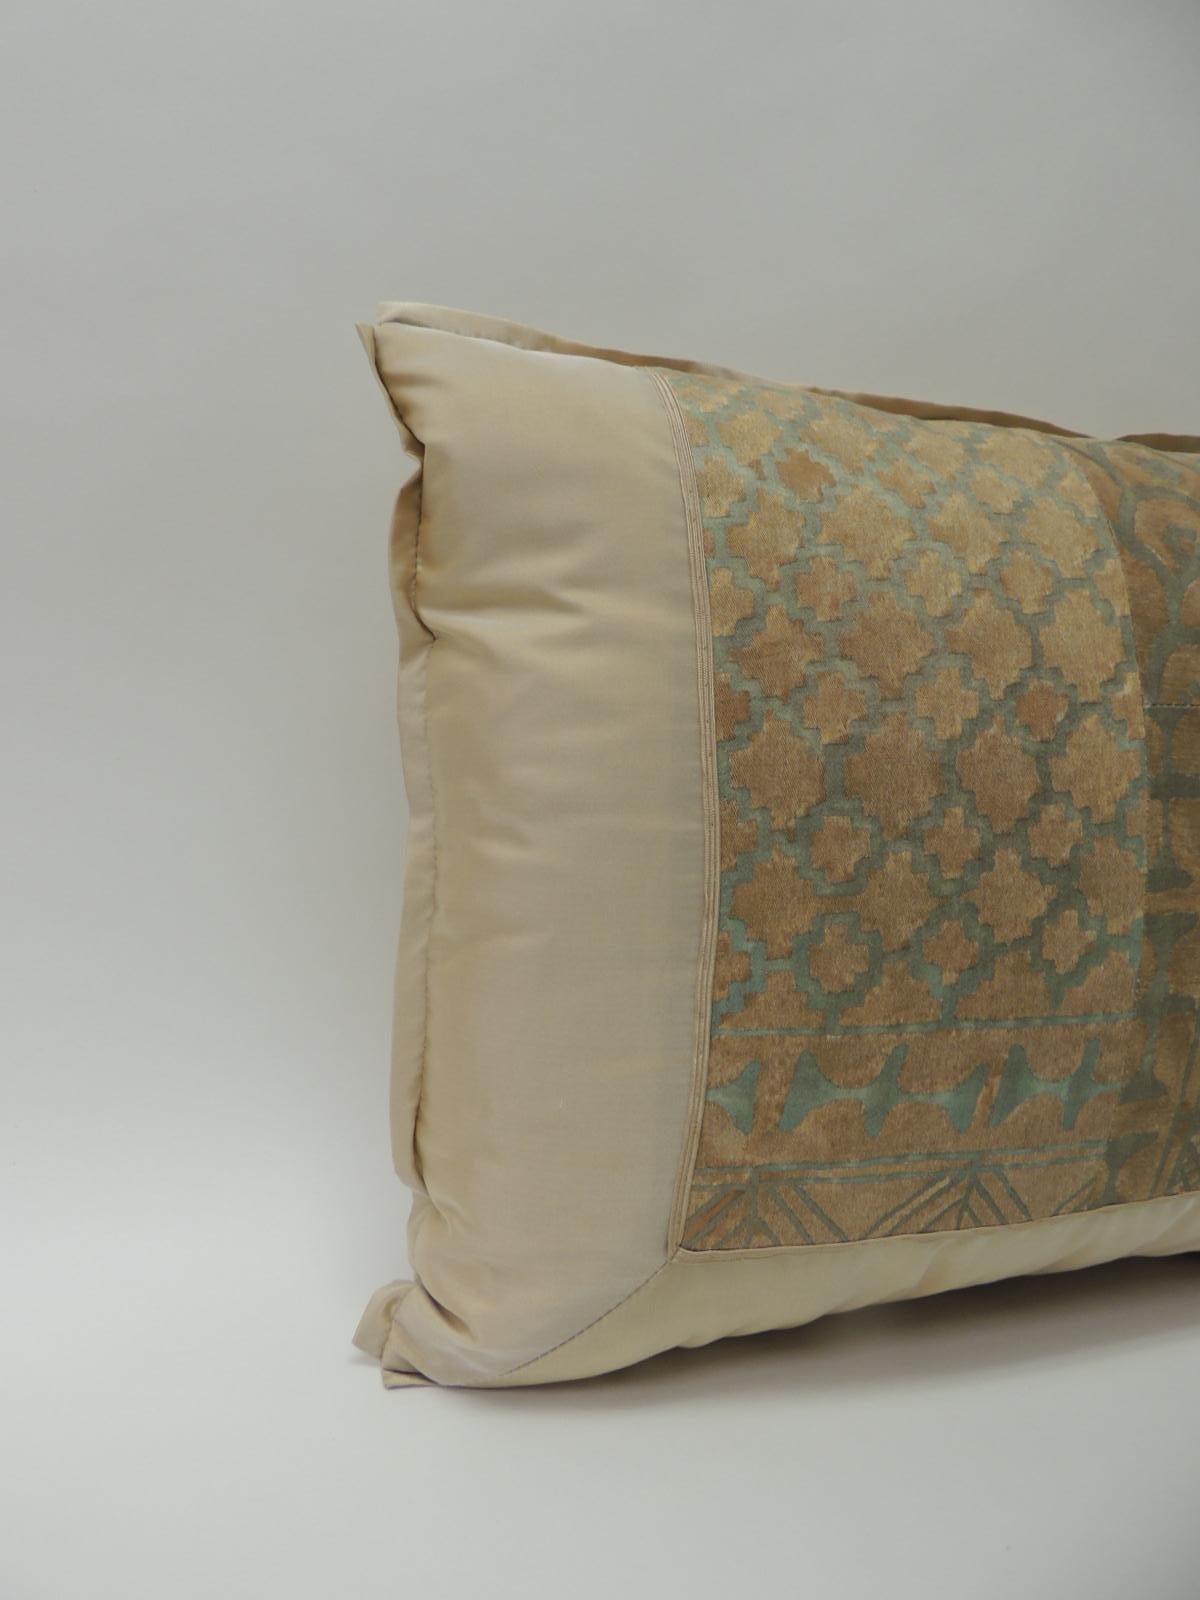 Vintage Fortuny “Ashanti” copper on silver bolster decorative pillow handcrafted in a patchwork decorative style. 
Framed with ecru color silk same as backing and matching ATG decorative flat silk trim. And embellished with silk flat ribbon at the